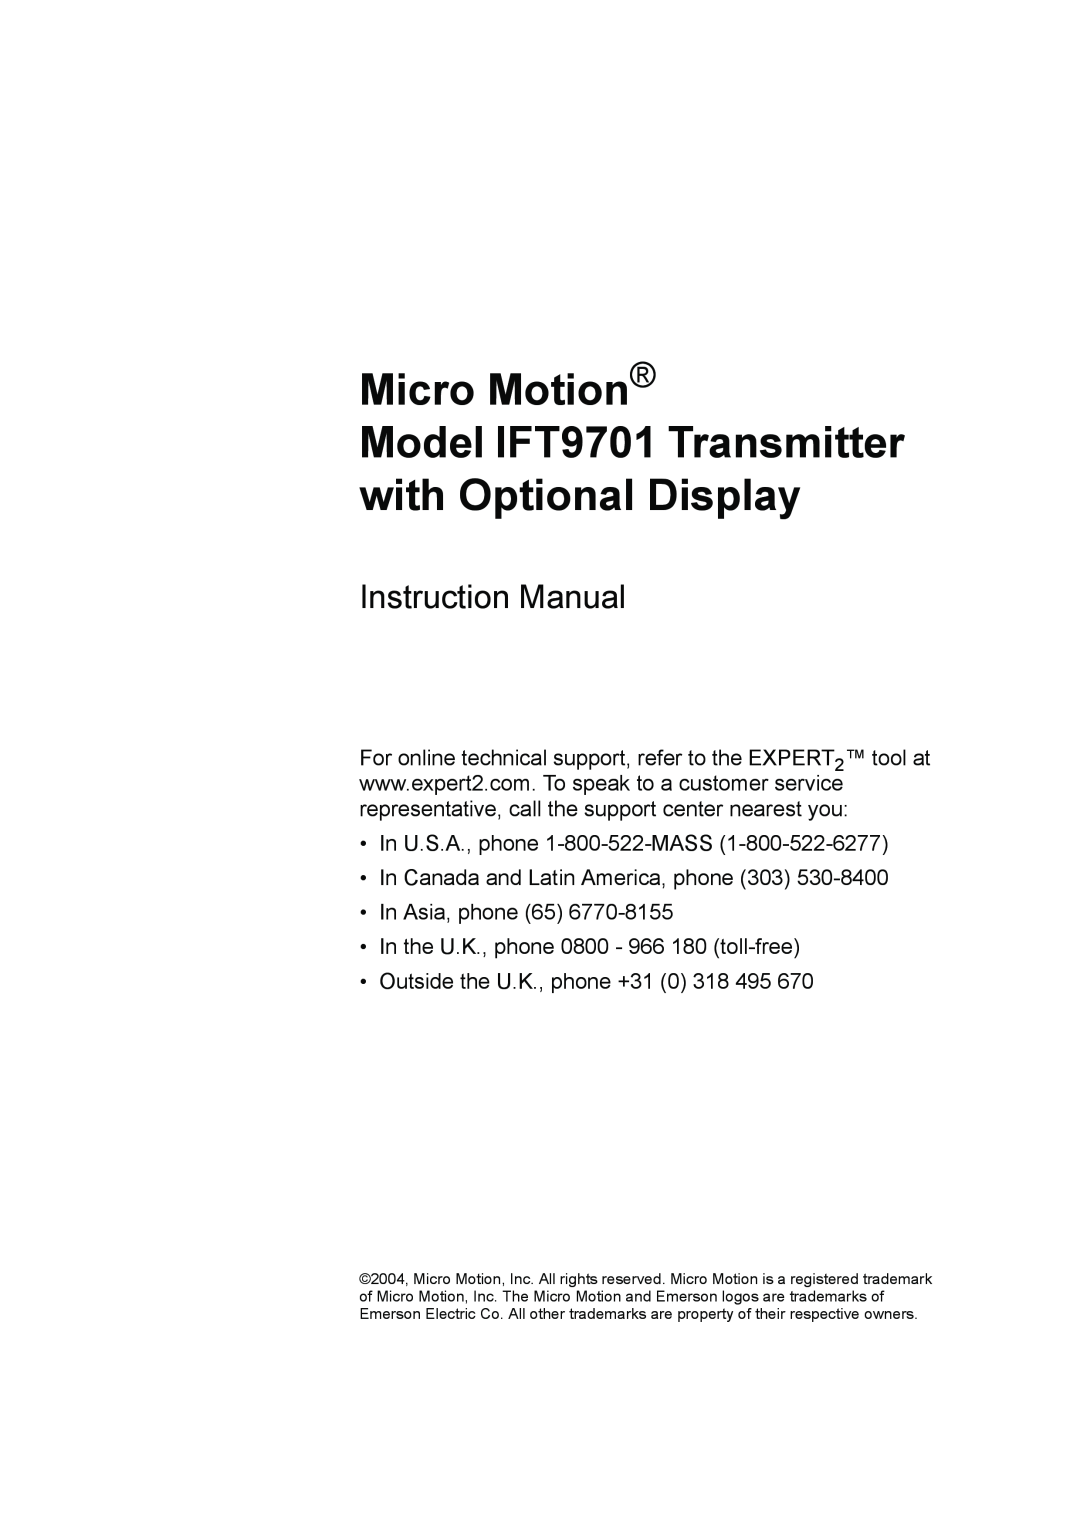 Emerson instruction manual Micro Motion, Model IFT9701 Transmitter with Optional Display 